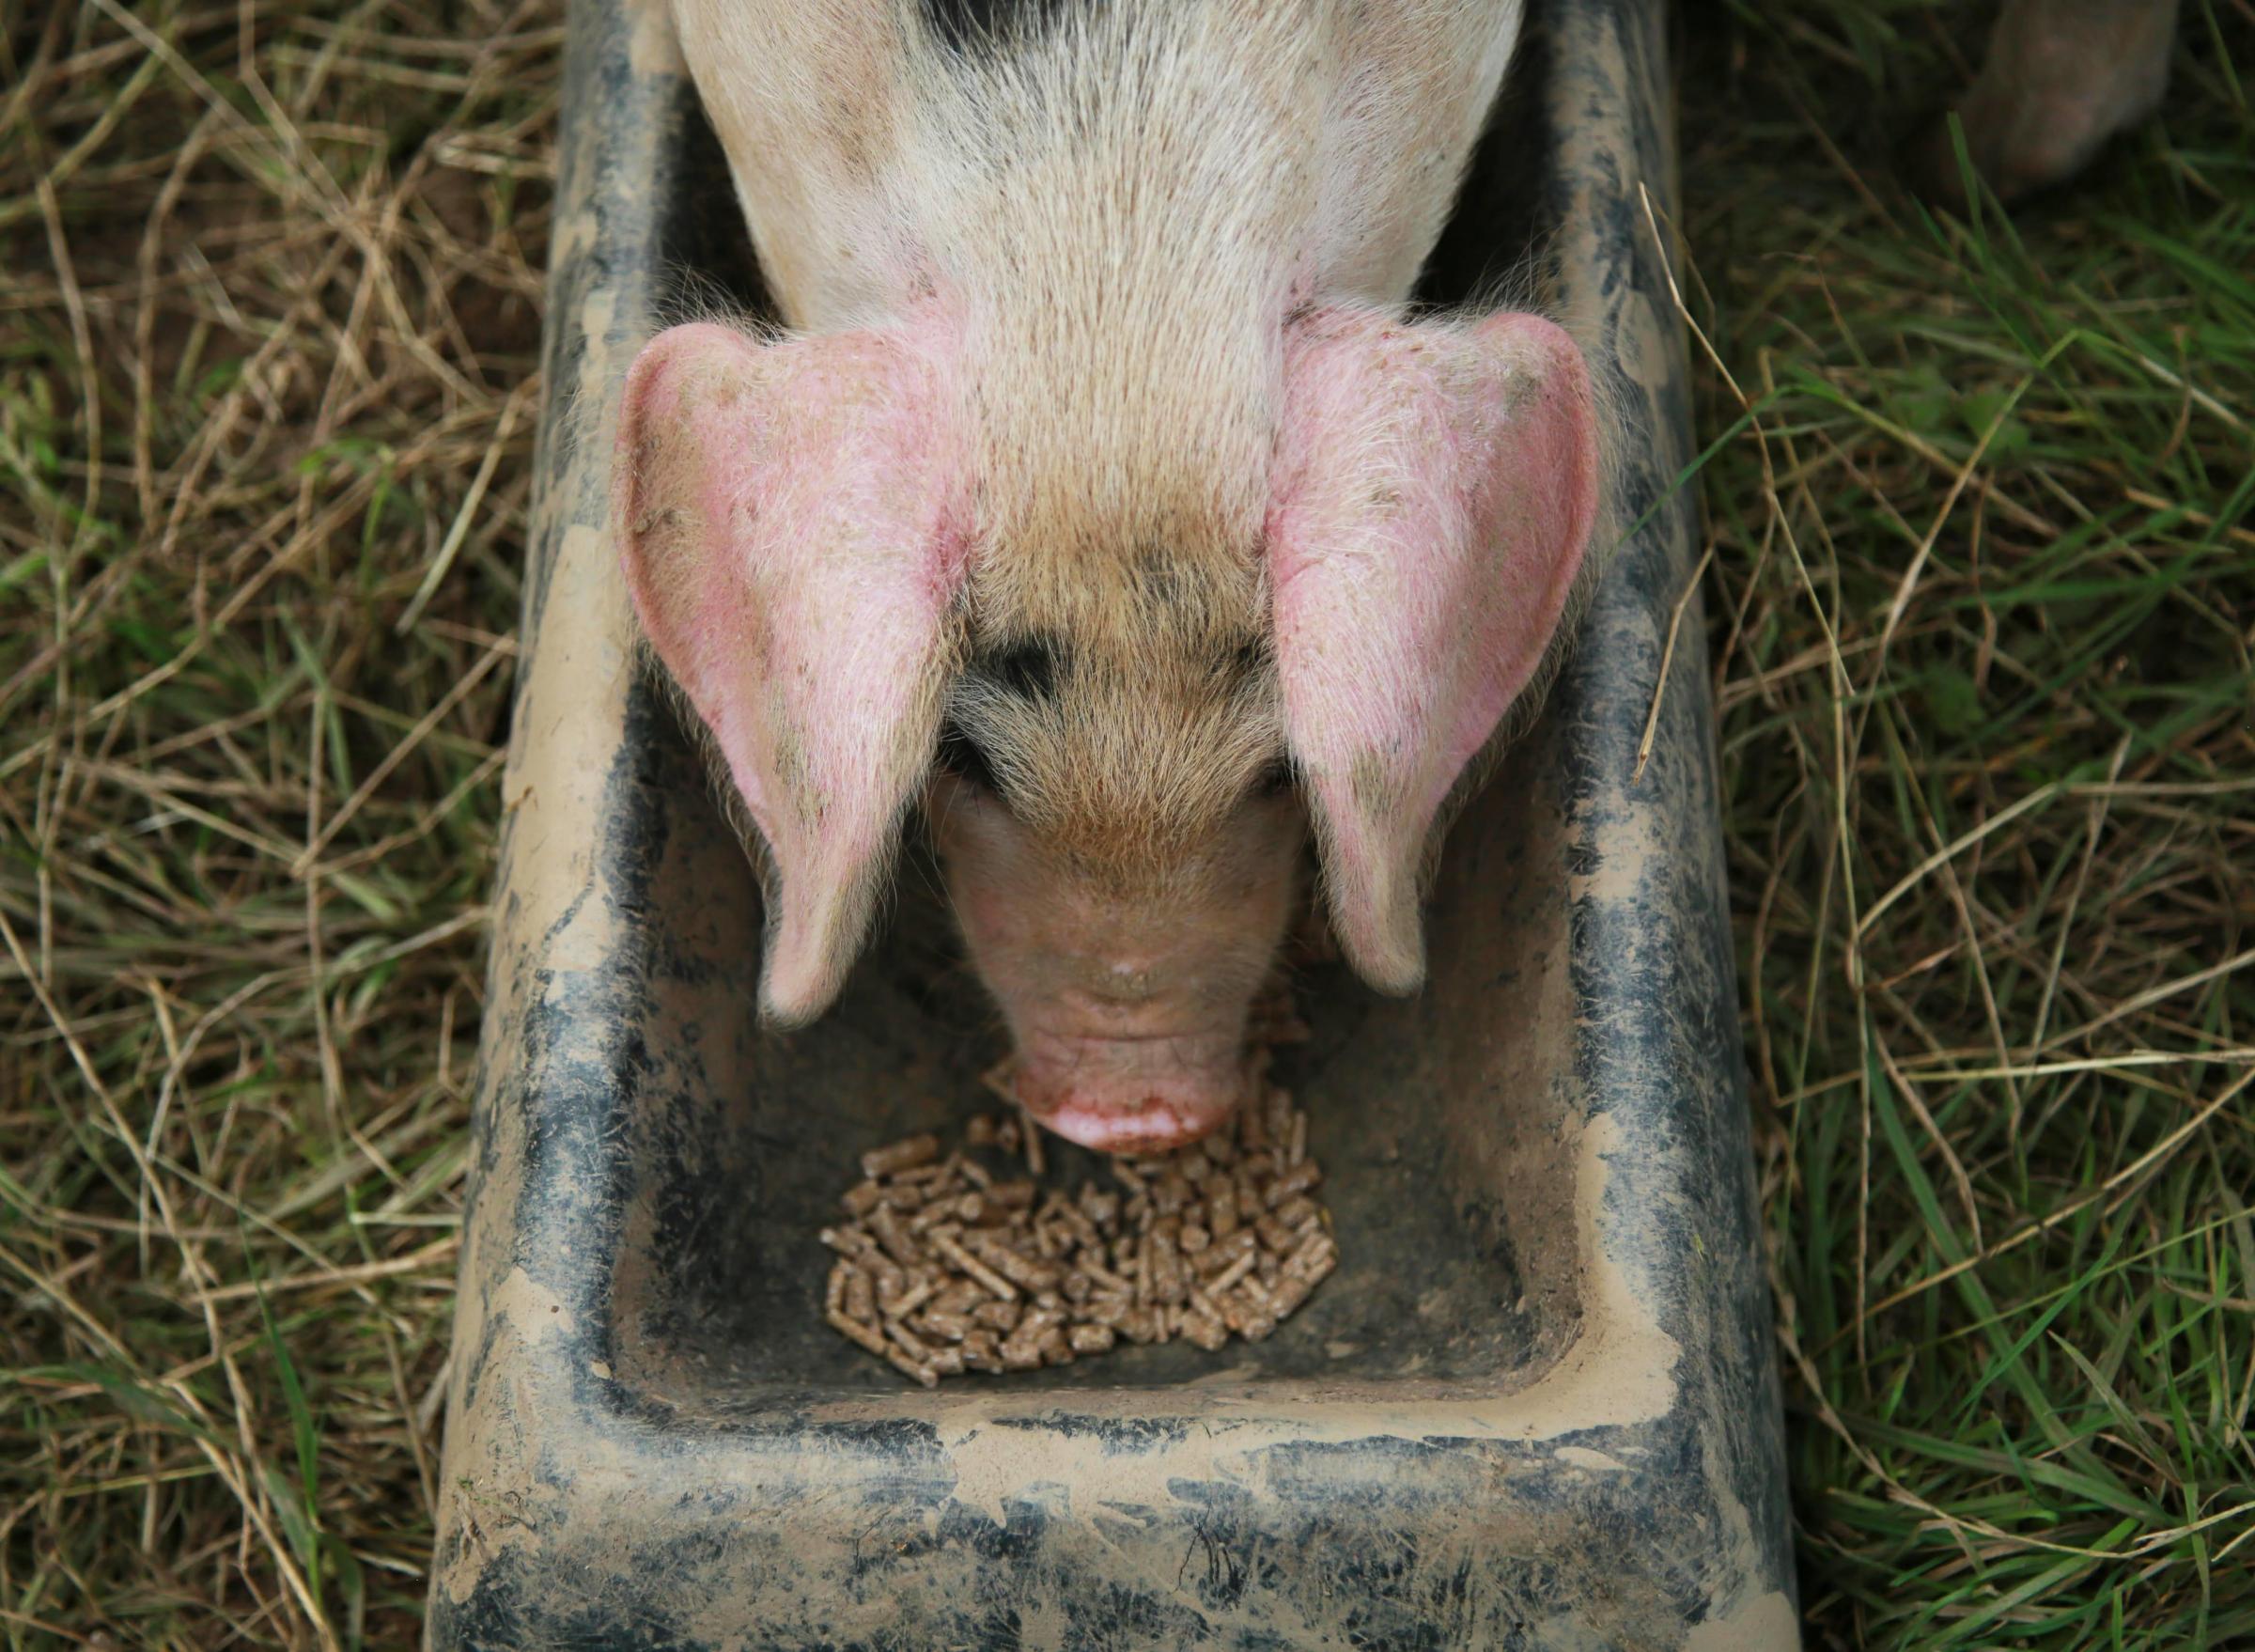 Why do some people believe the saying the word pig is unlucky? Picture: SARAH CALDECOTT